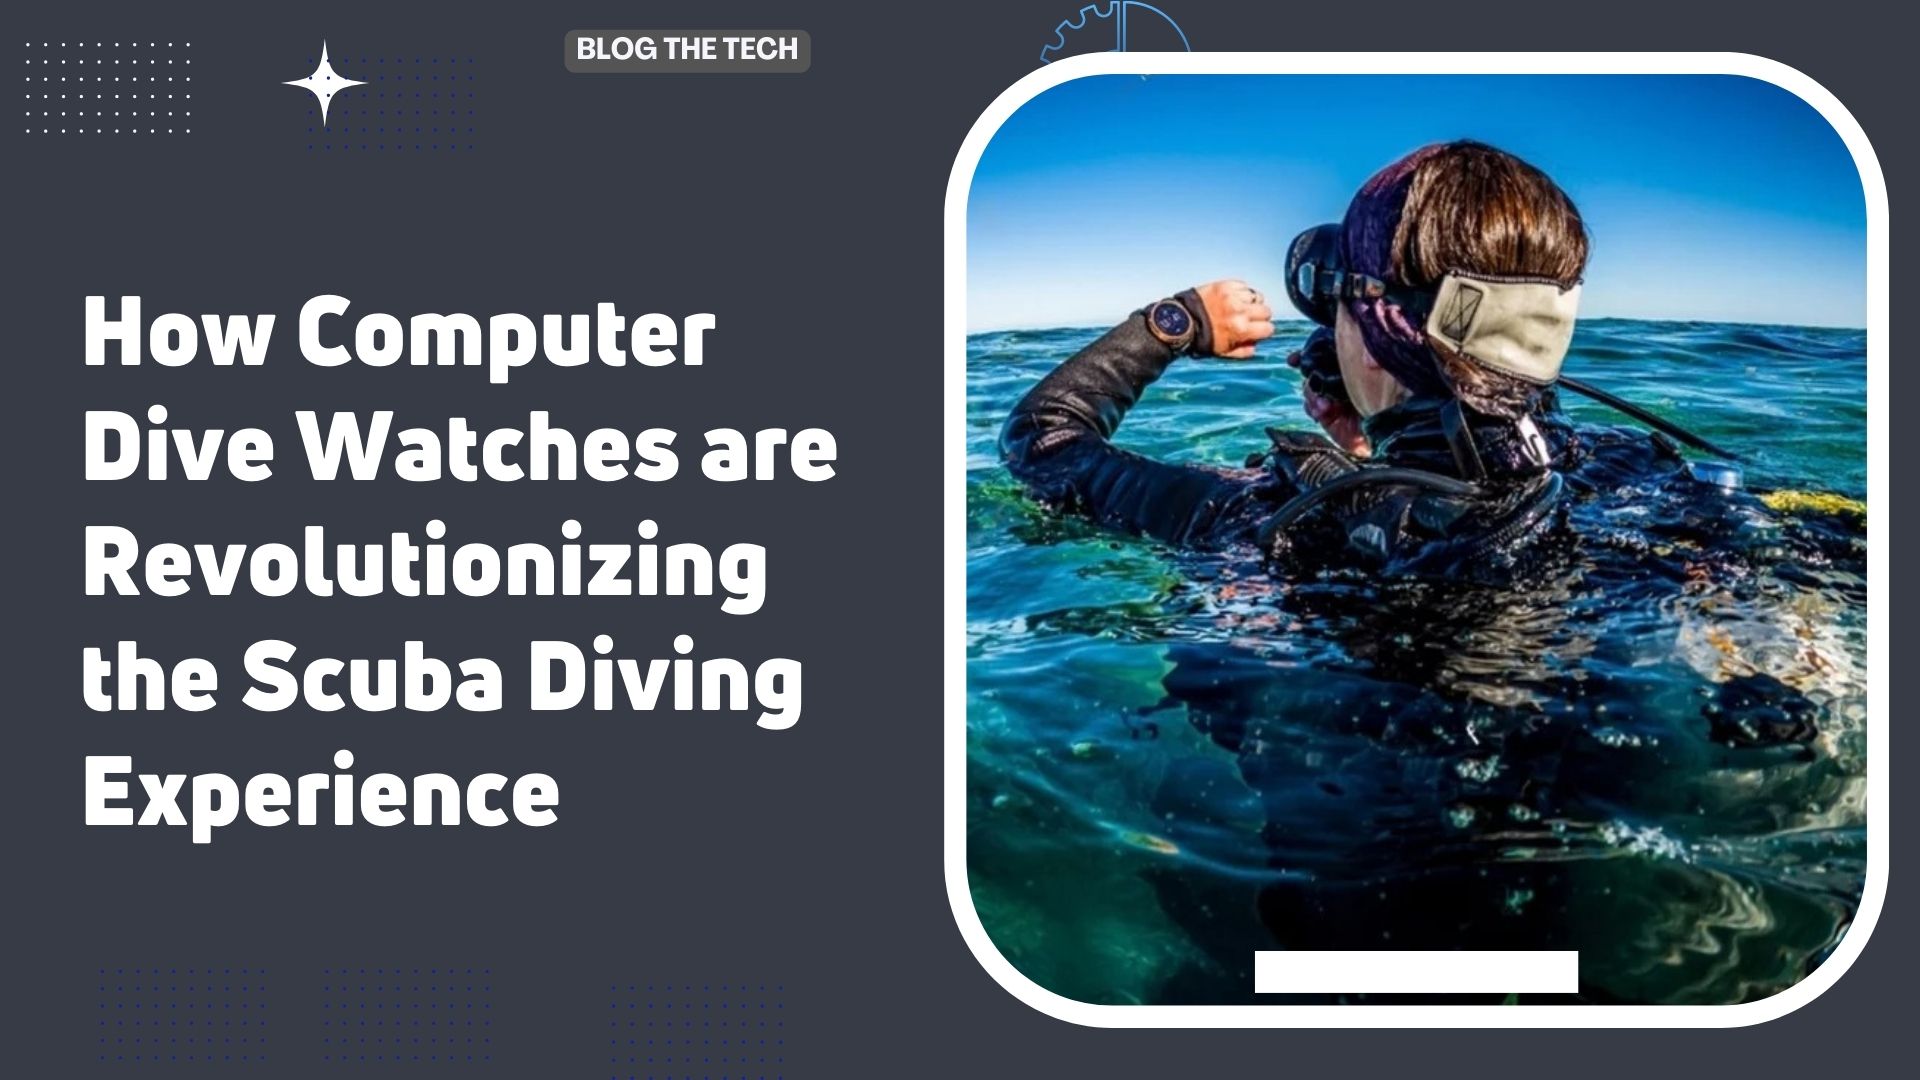 How Computer Dive Watches are Revolutionizing the Scuba Diving Experience